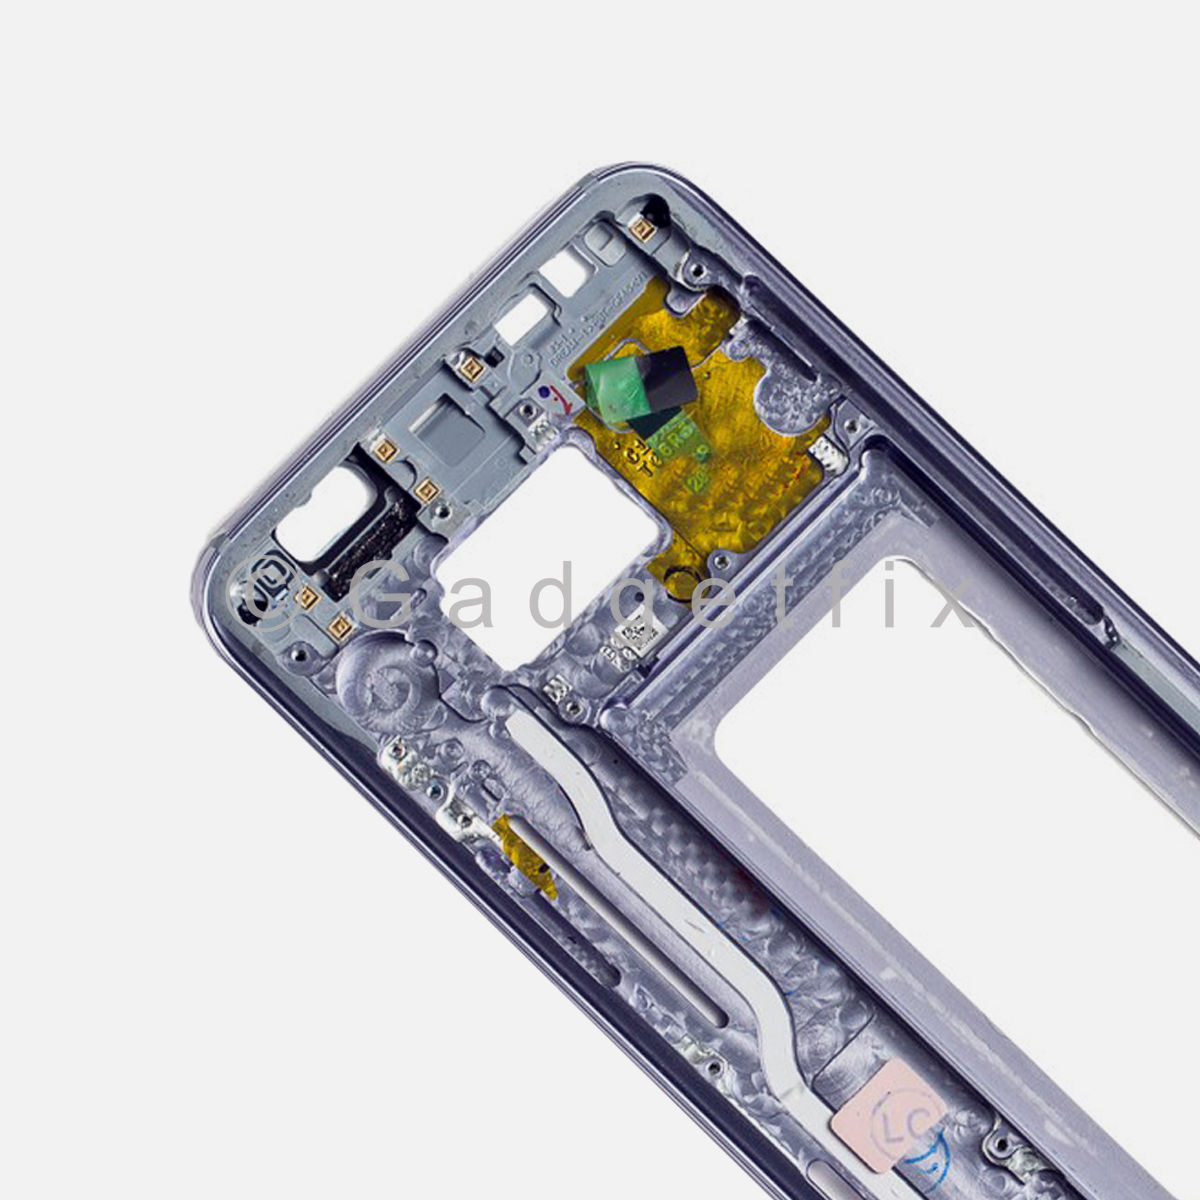 Orchid Gray Samsung Galaxy S8 LCD Holder Middle Frame Bezel Mid Chassis Housing